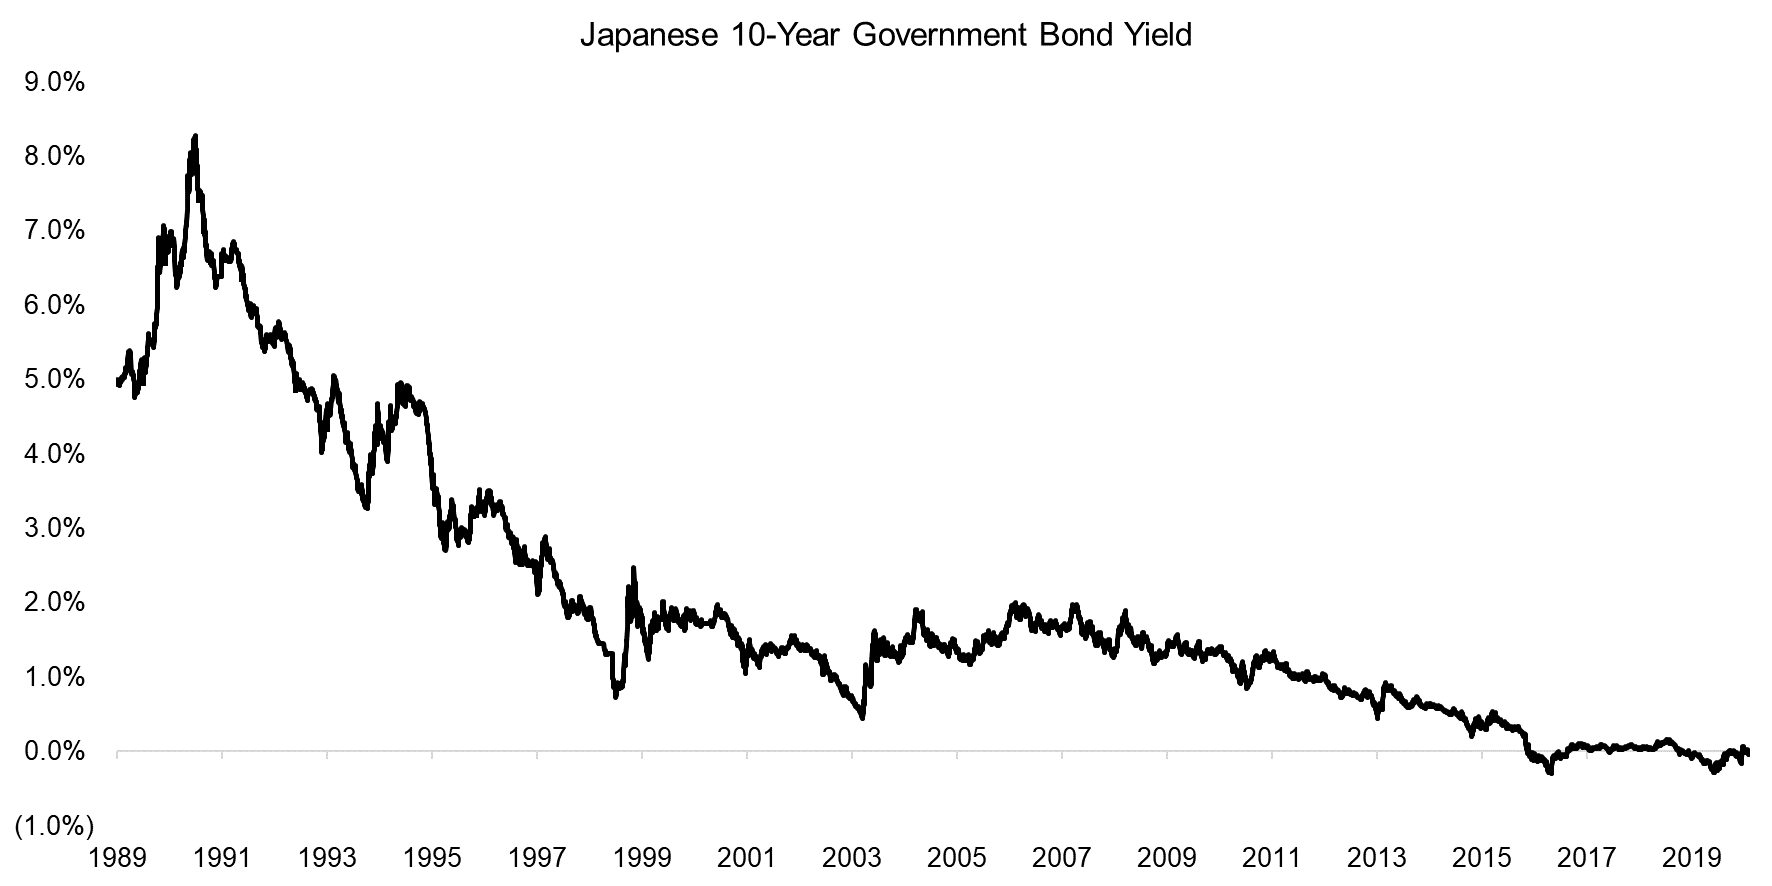 Japanese 10-Year Government Bond Yield